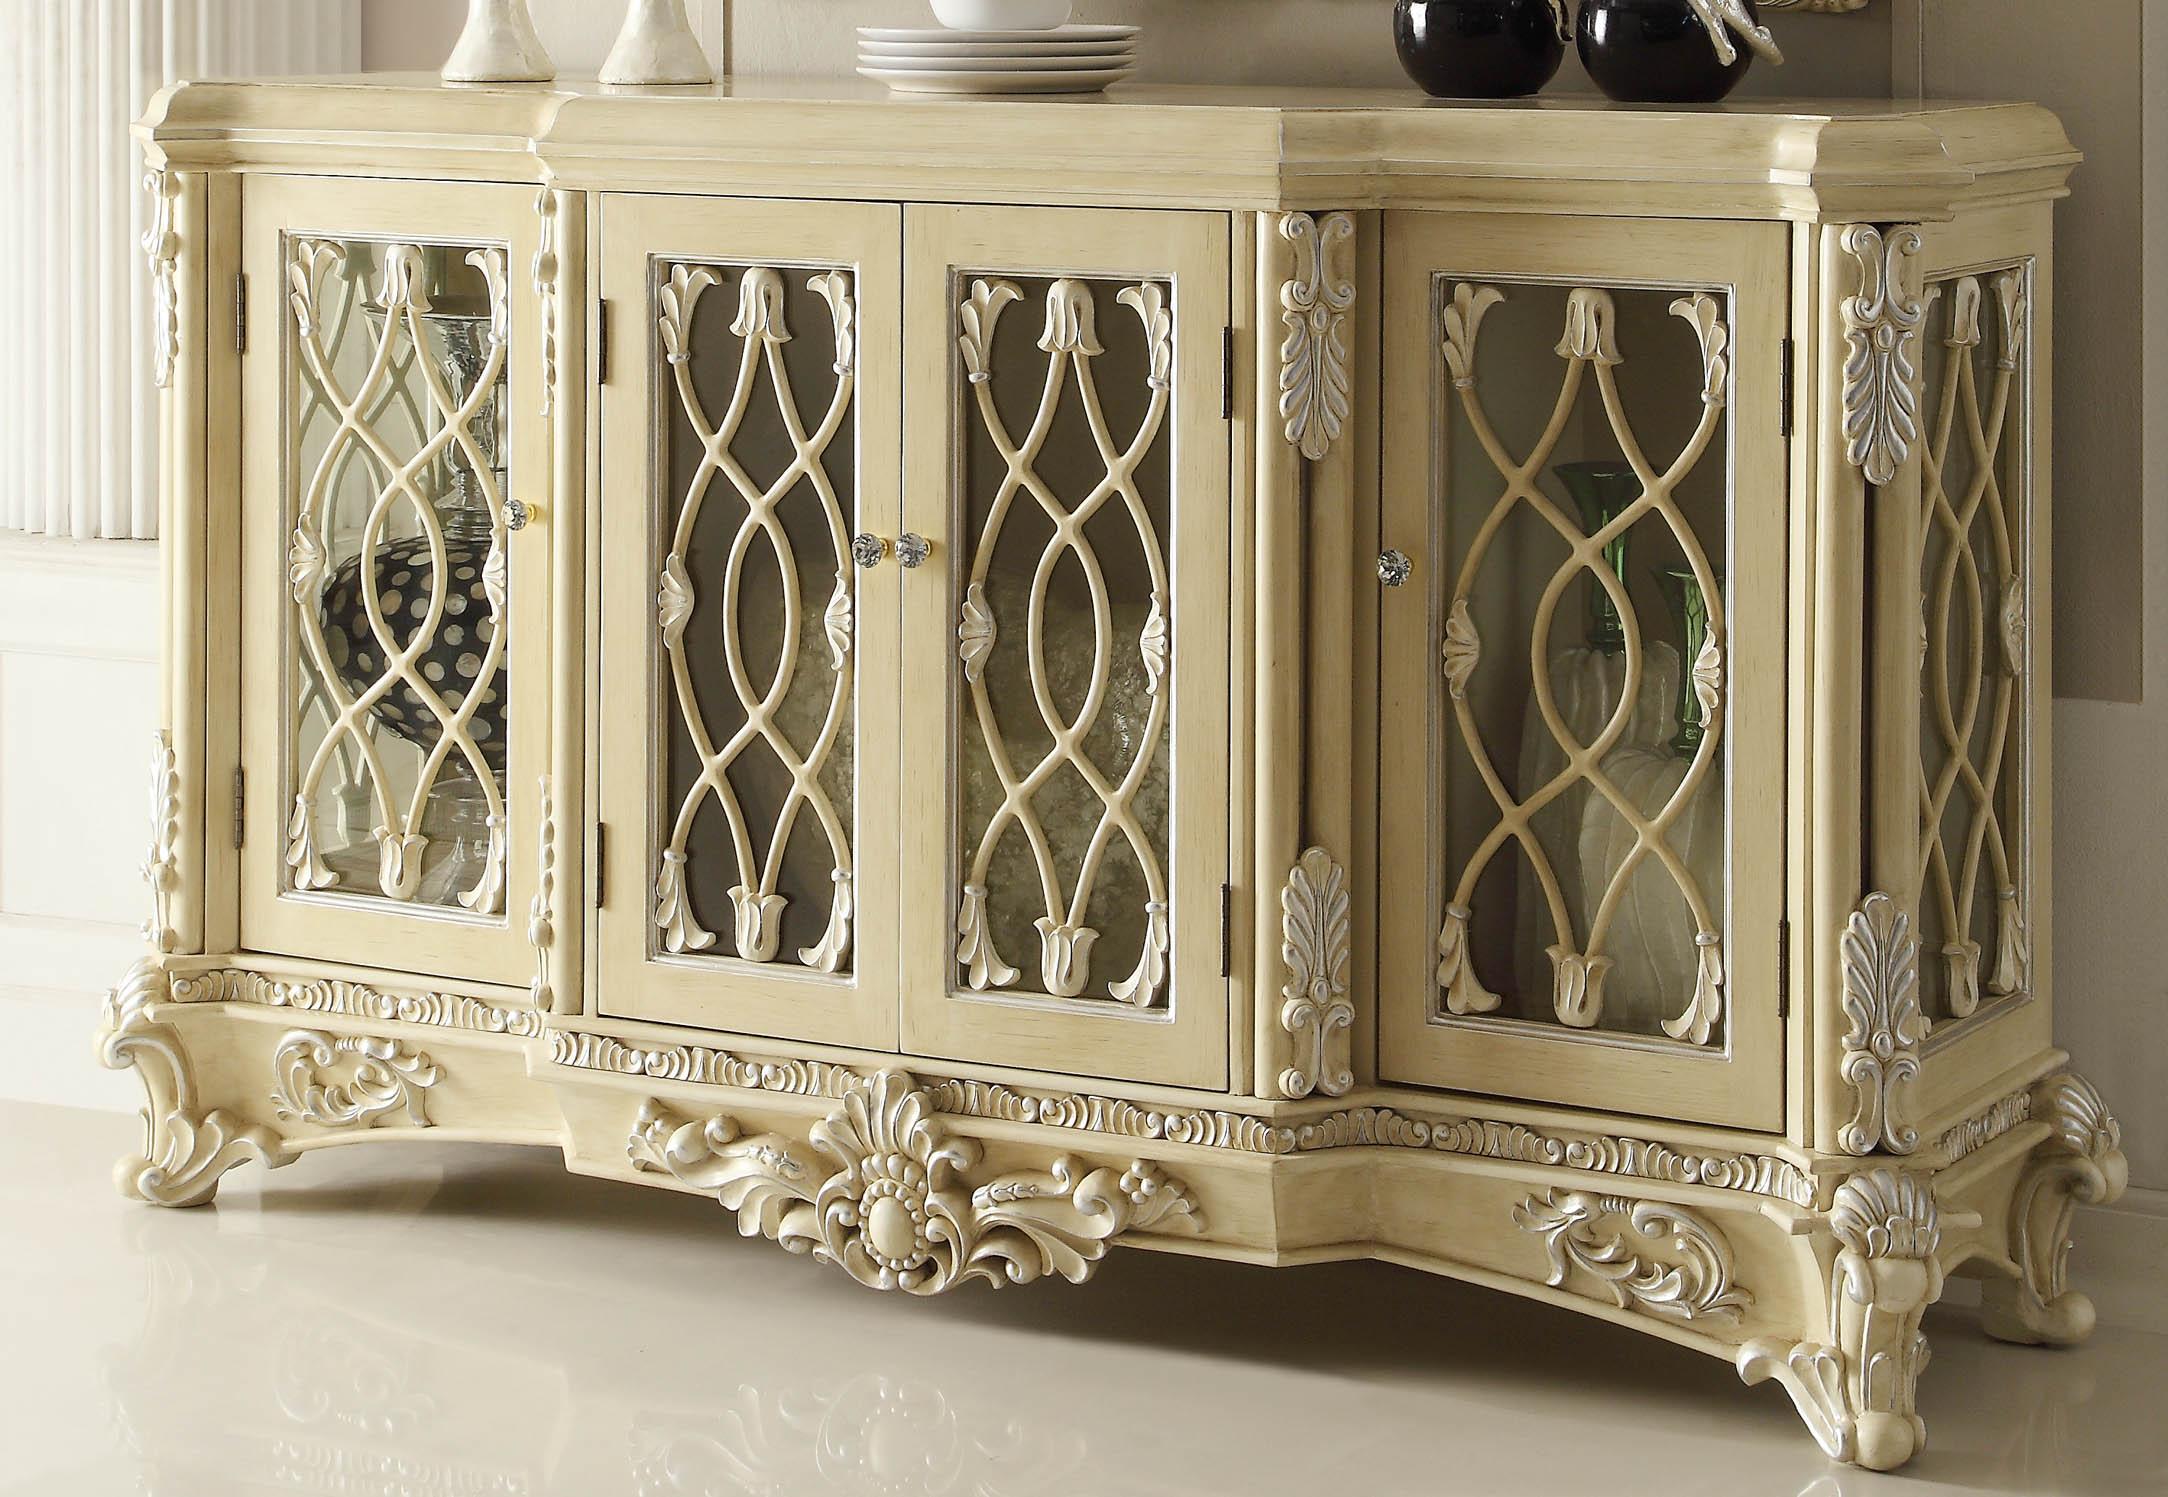 

    
Luxury Cream Buffet & Mirror Wood Carved Traditional Homey Design HD-5800
